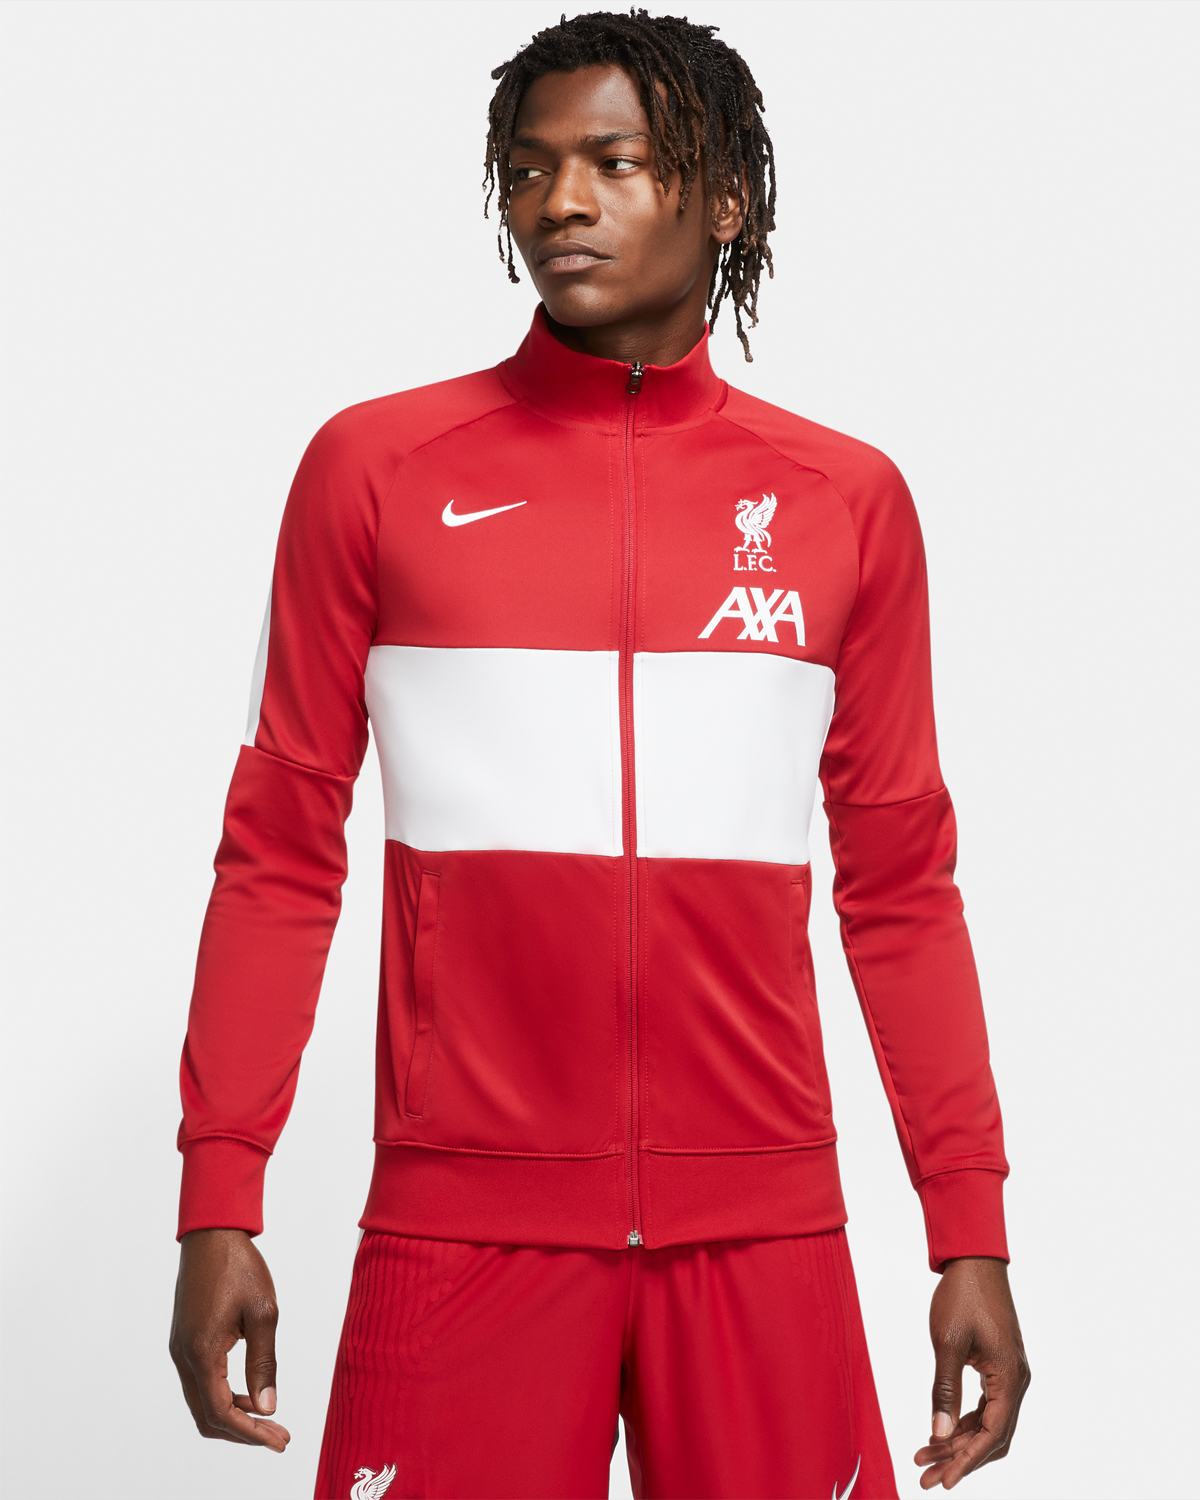 red and grey nike jacket